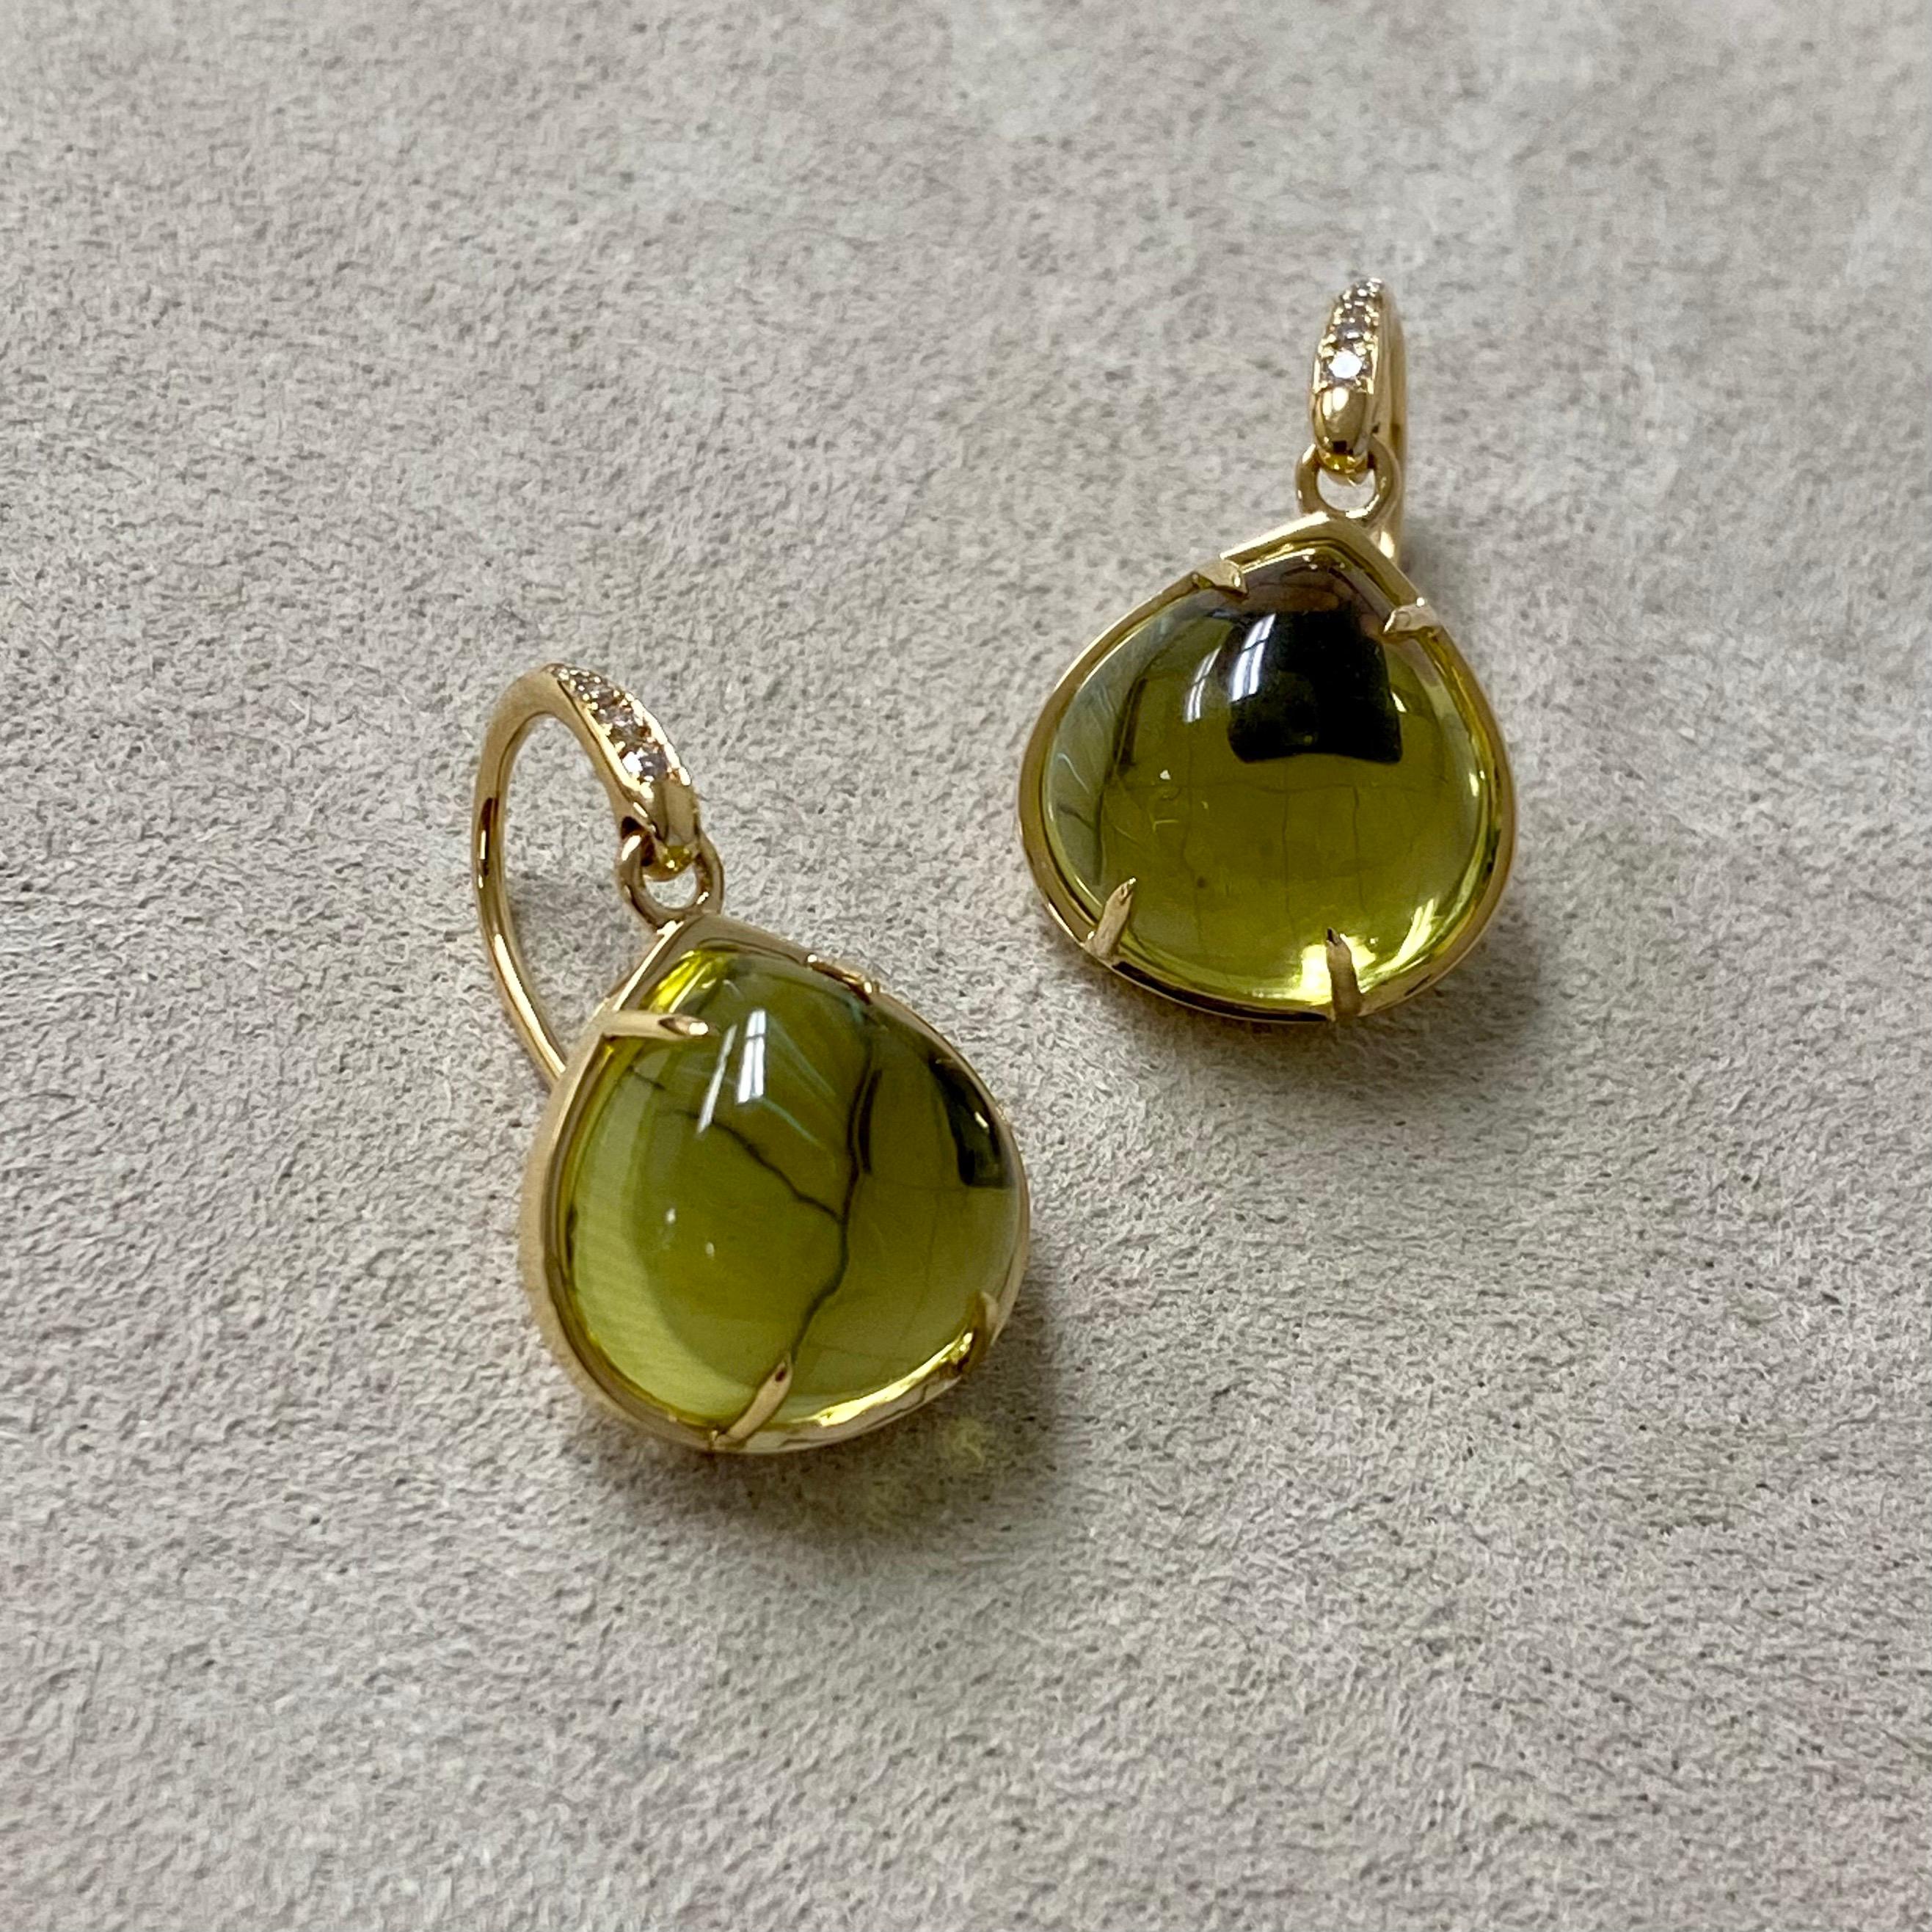 Created in 18kyg
Lemon quartz 11 carats approx.
Diamonds 0.05 carat approx.
French wire for pierced ears
Limited edition

Handcrafted in 18kyg, these luxurious earrings boast an impressive 11 carats of sumptuous lemon quartz and a decadent 0.05